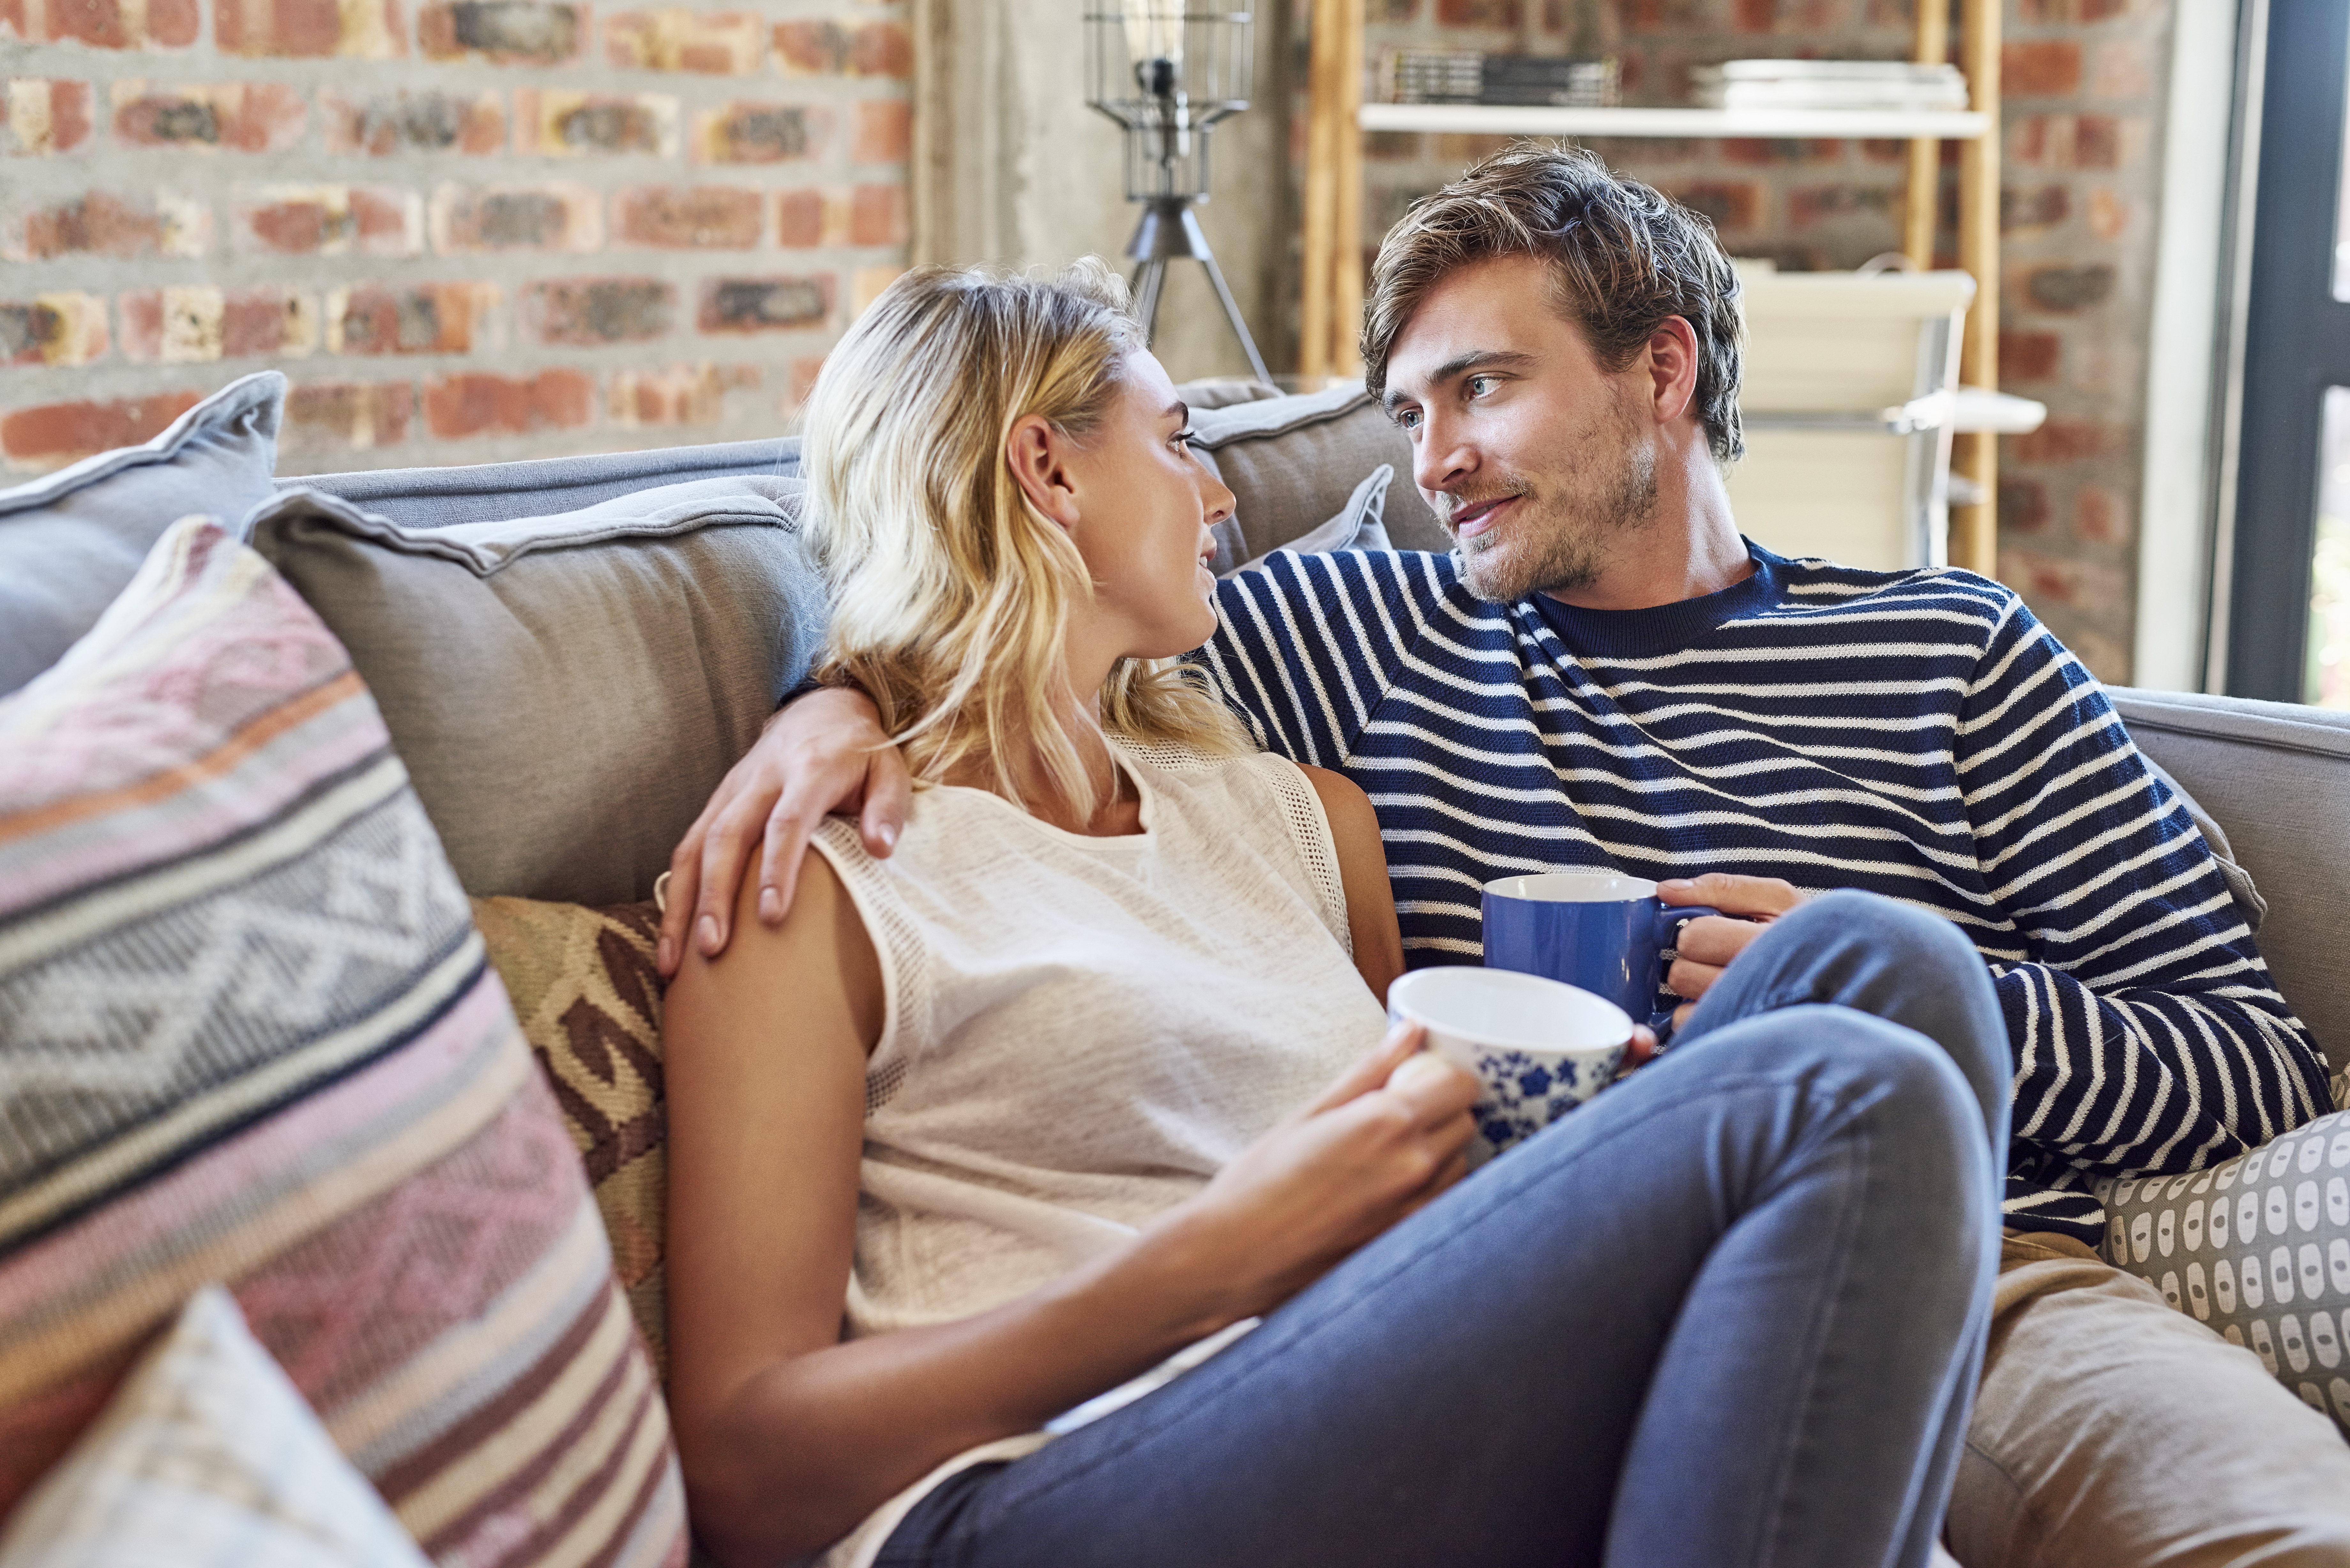 Romantic couple looking at each other on sofa | Source: Getty Images